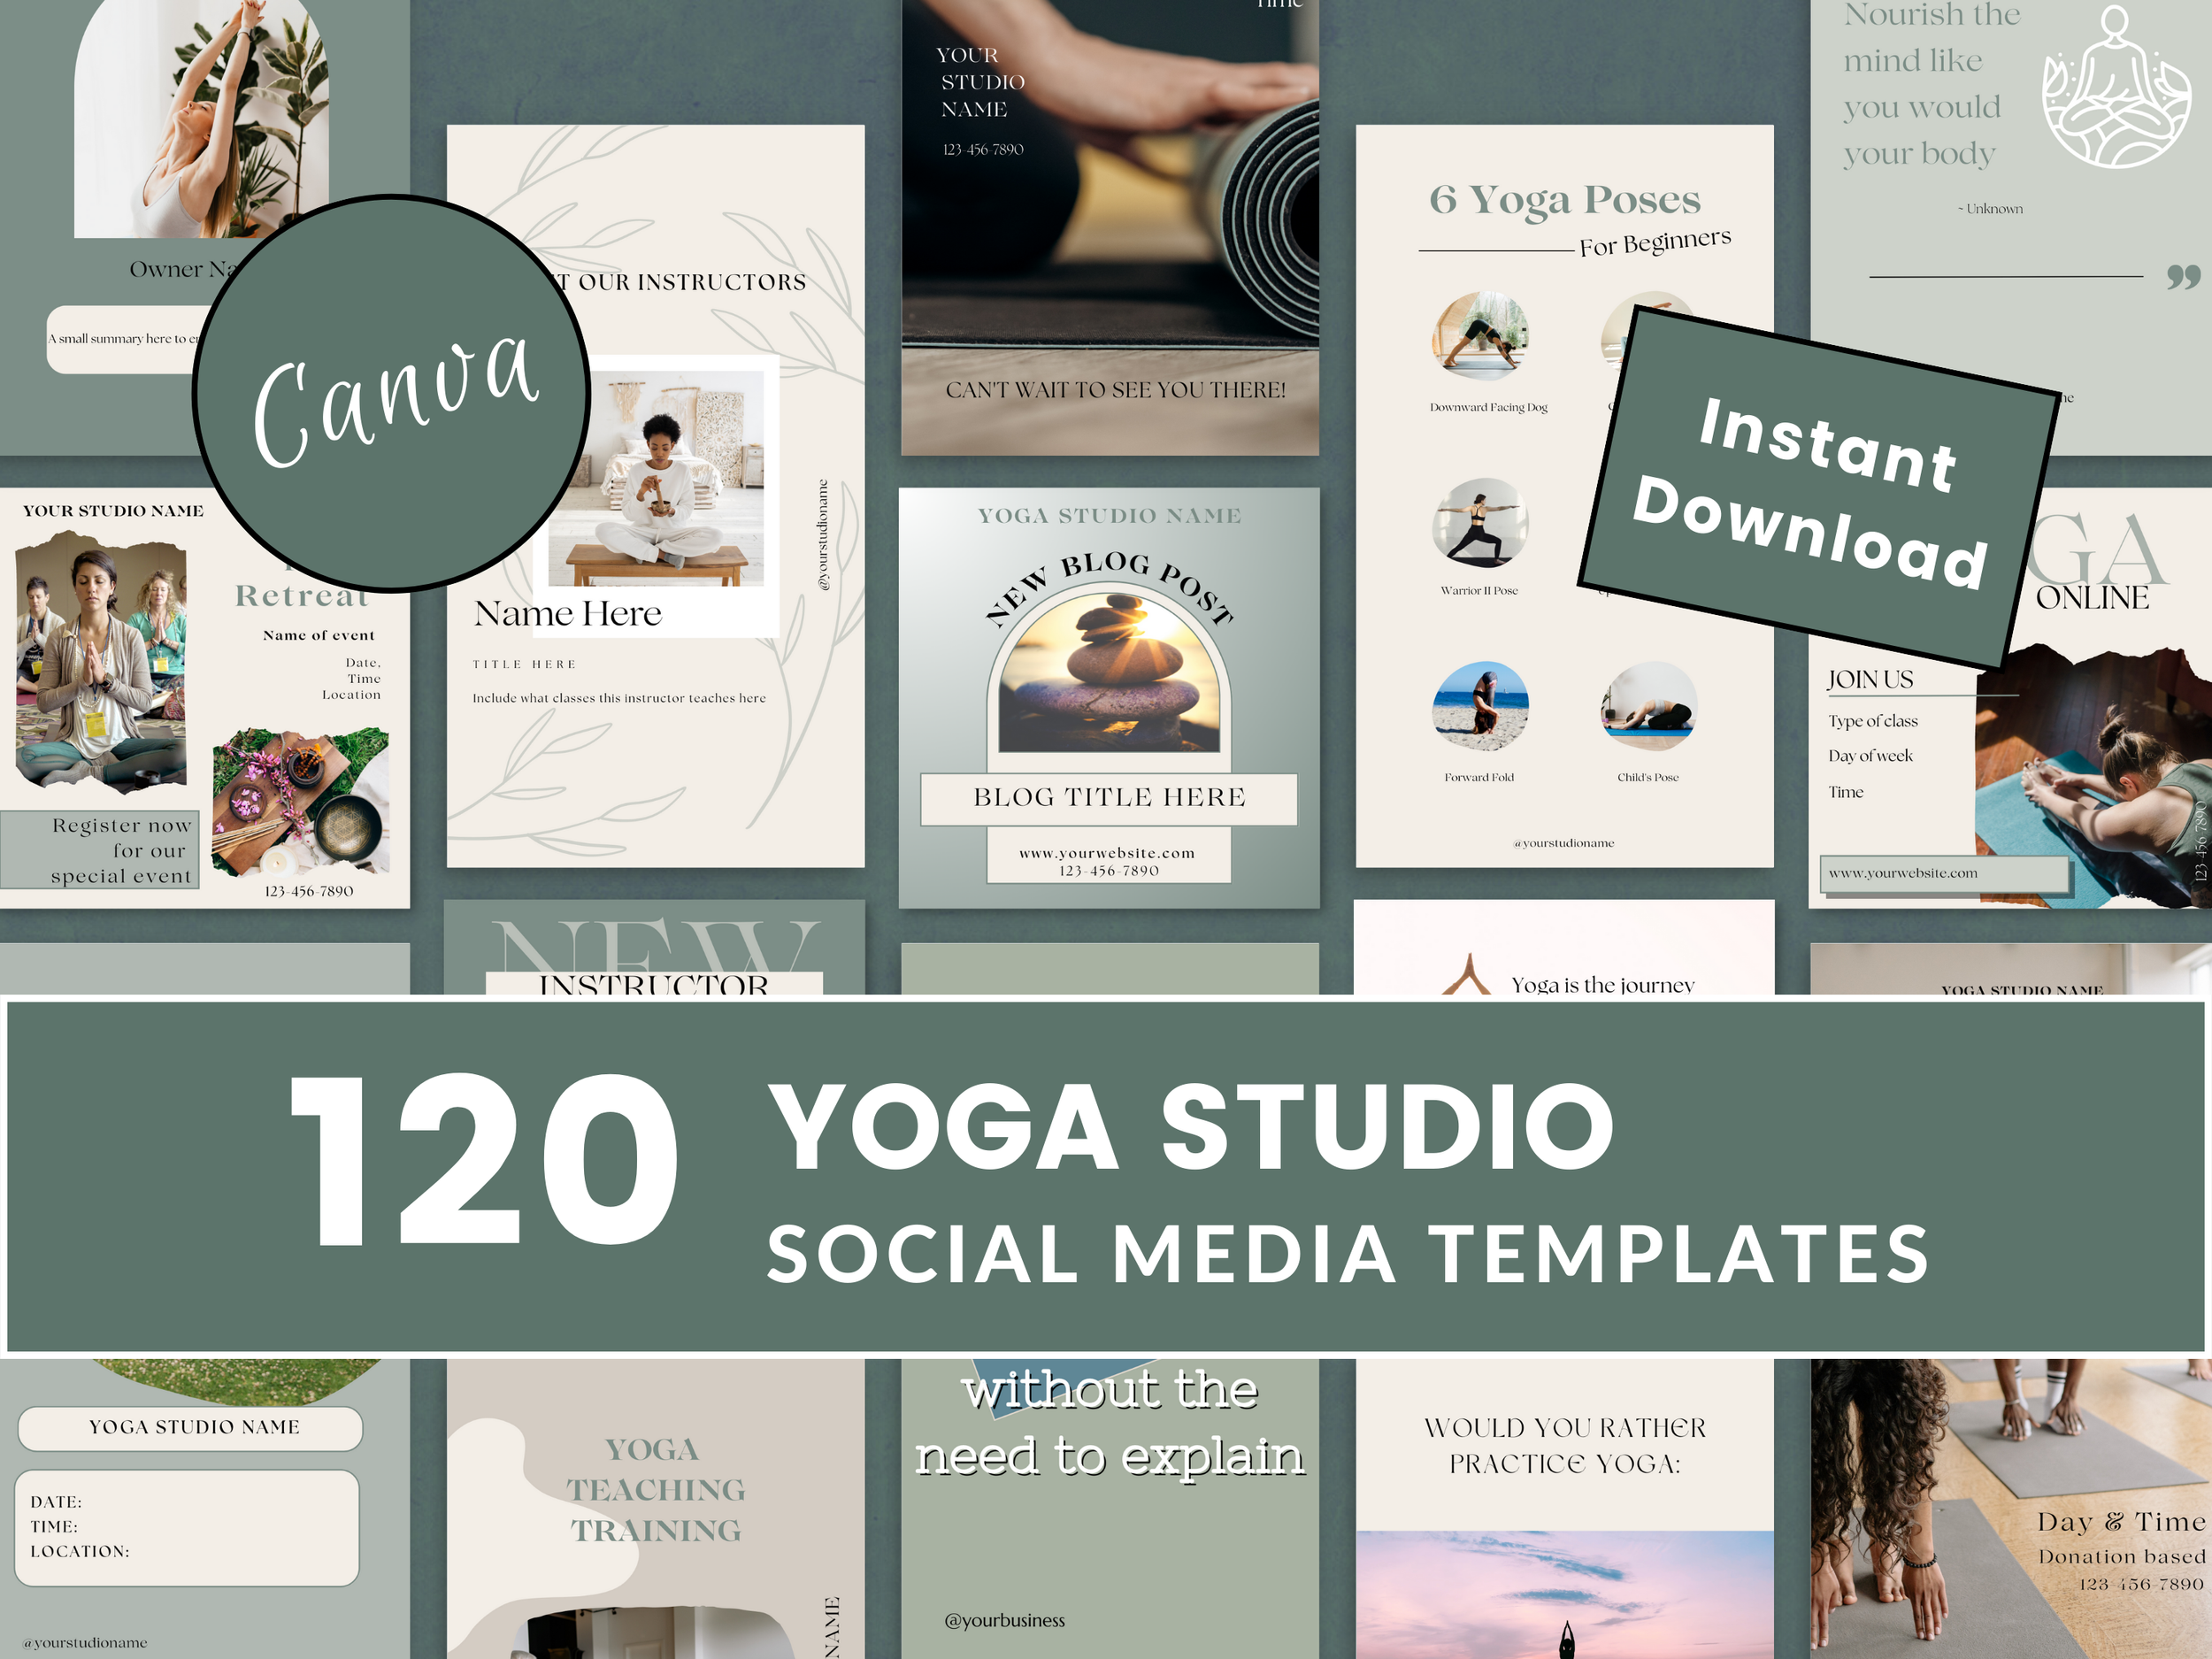 Yoga Studio Templates Green ETSY PRODUCT LONG LISTING PHOTOS - YST03 L13.png